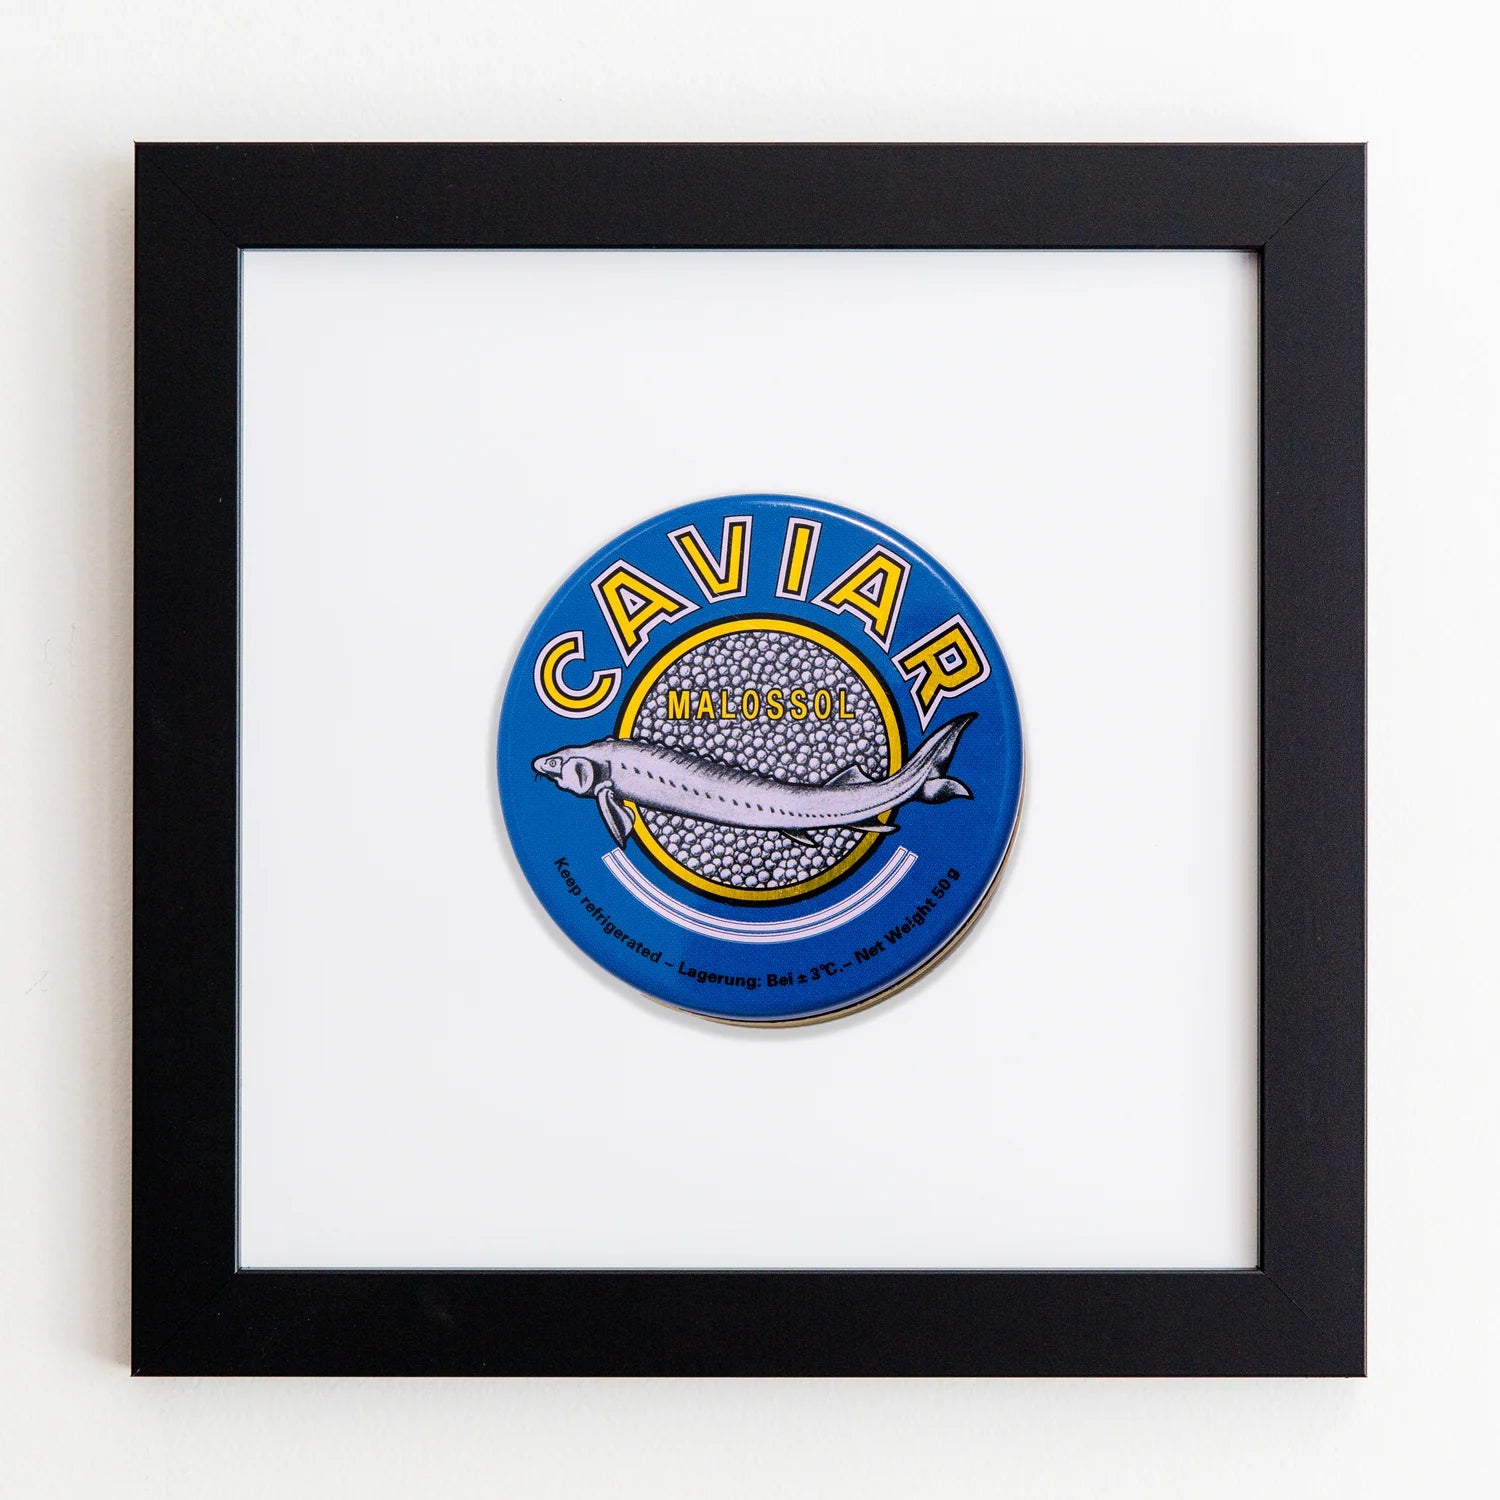 A framed acrylic image featuring a vibrant circular label for &quot;Malossol Caviar,&quot; with a stylized silver fish surrounded by a blue and yellow color scheme, in an Art Square Black Frame by Match South.